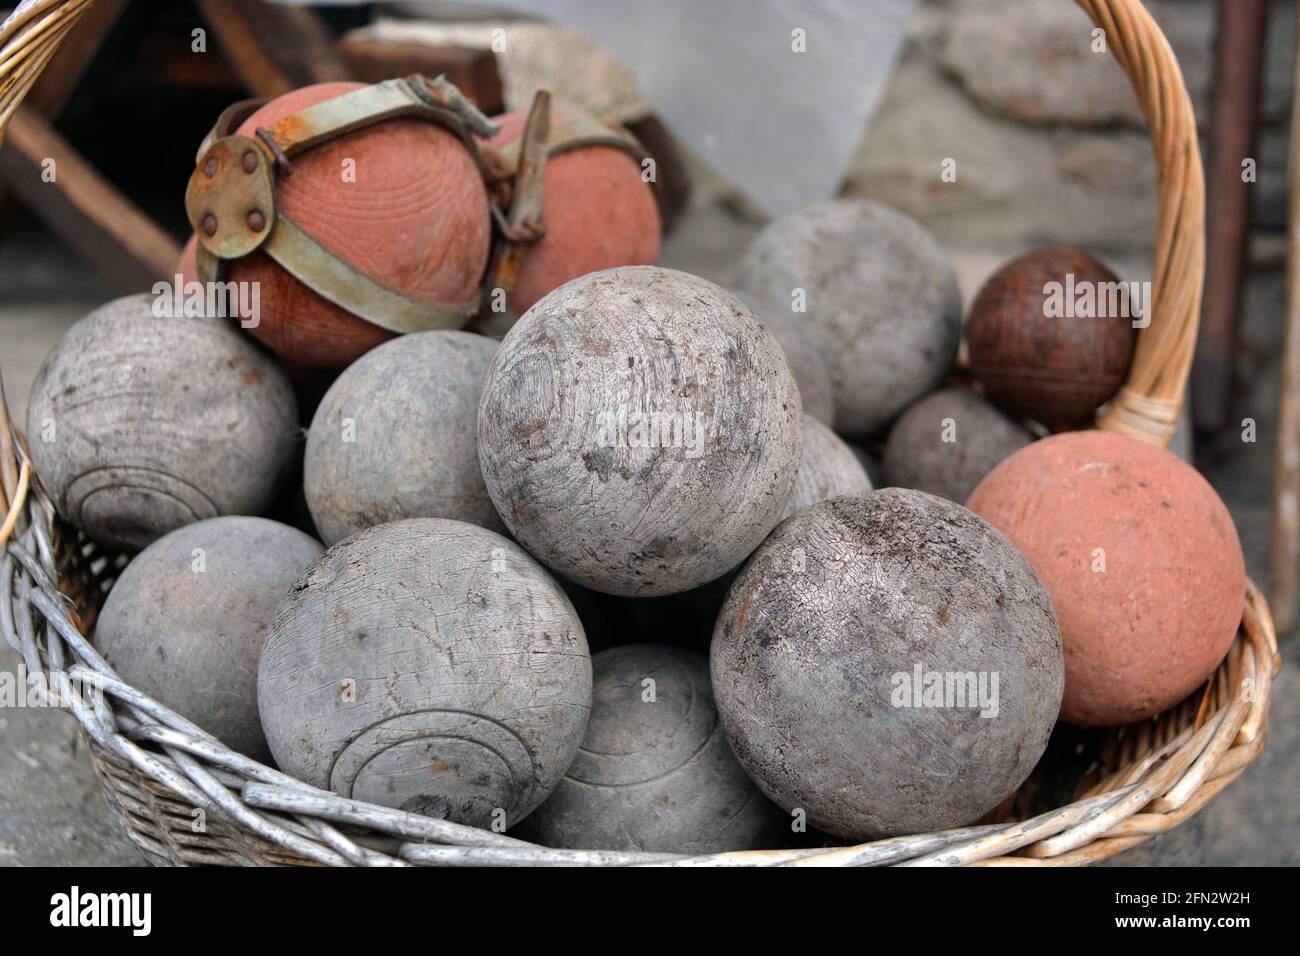 Wicker basket full of antique wooden bowls Stock Photo